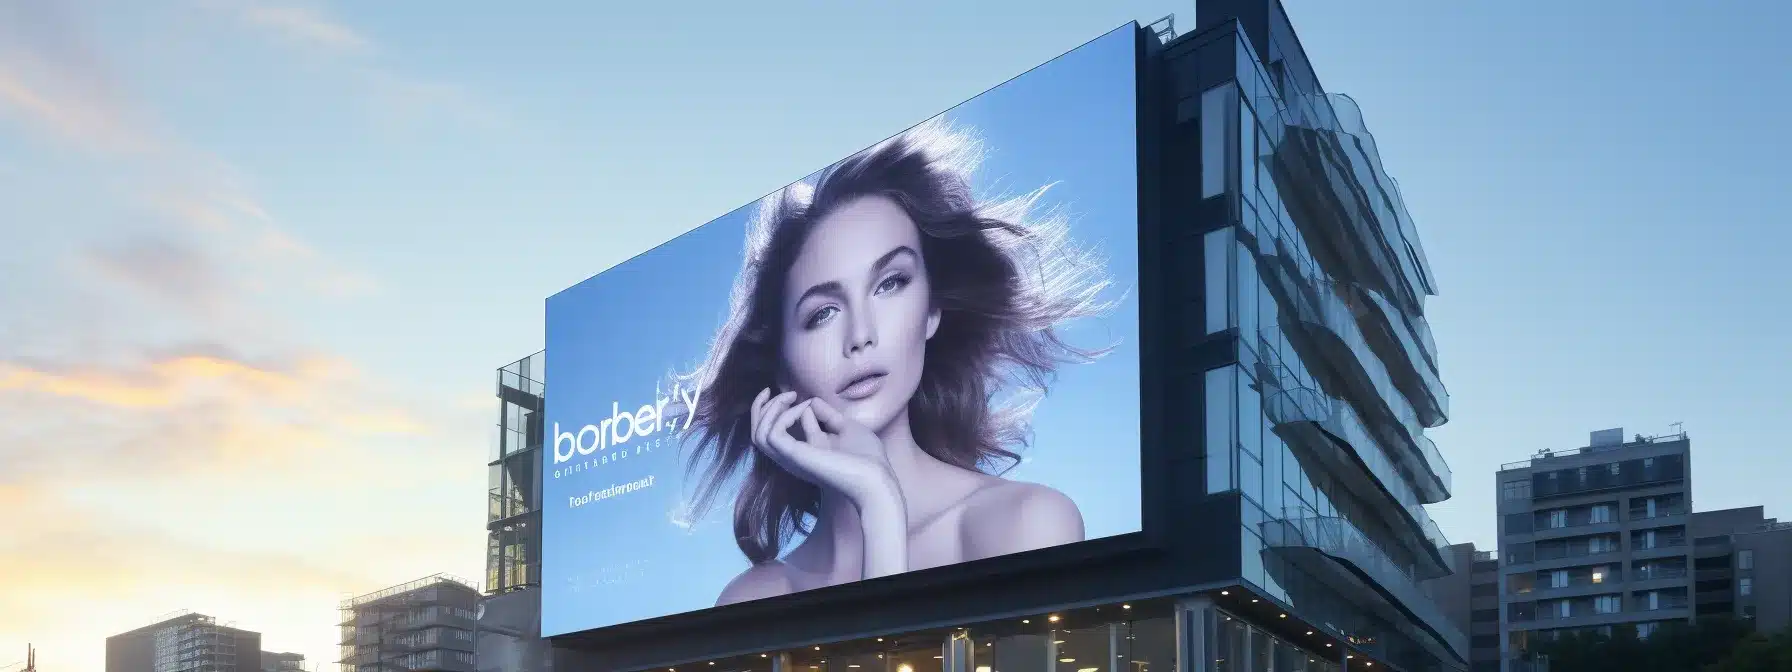 A Towering Billboard Displaying A Strong Corporate Image, Reflecting Brand Values And Captivating The Audience.